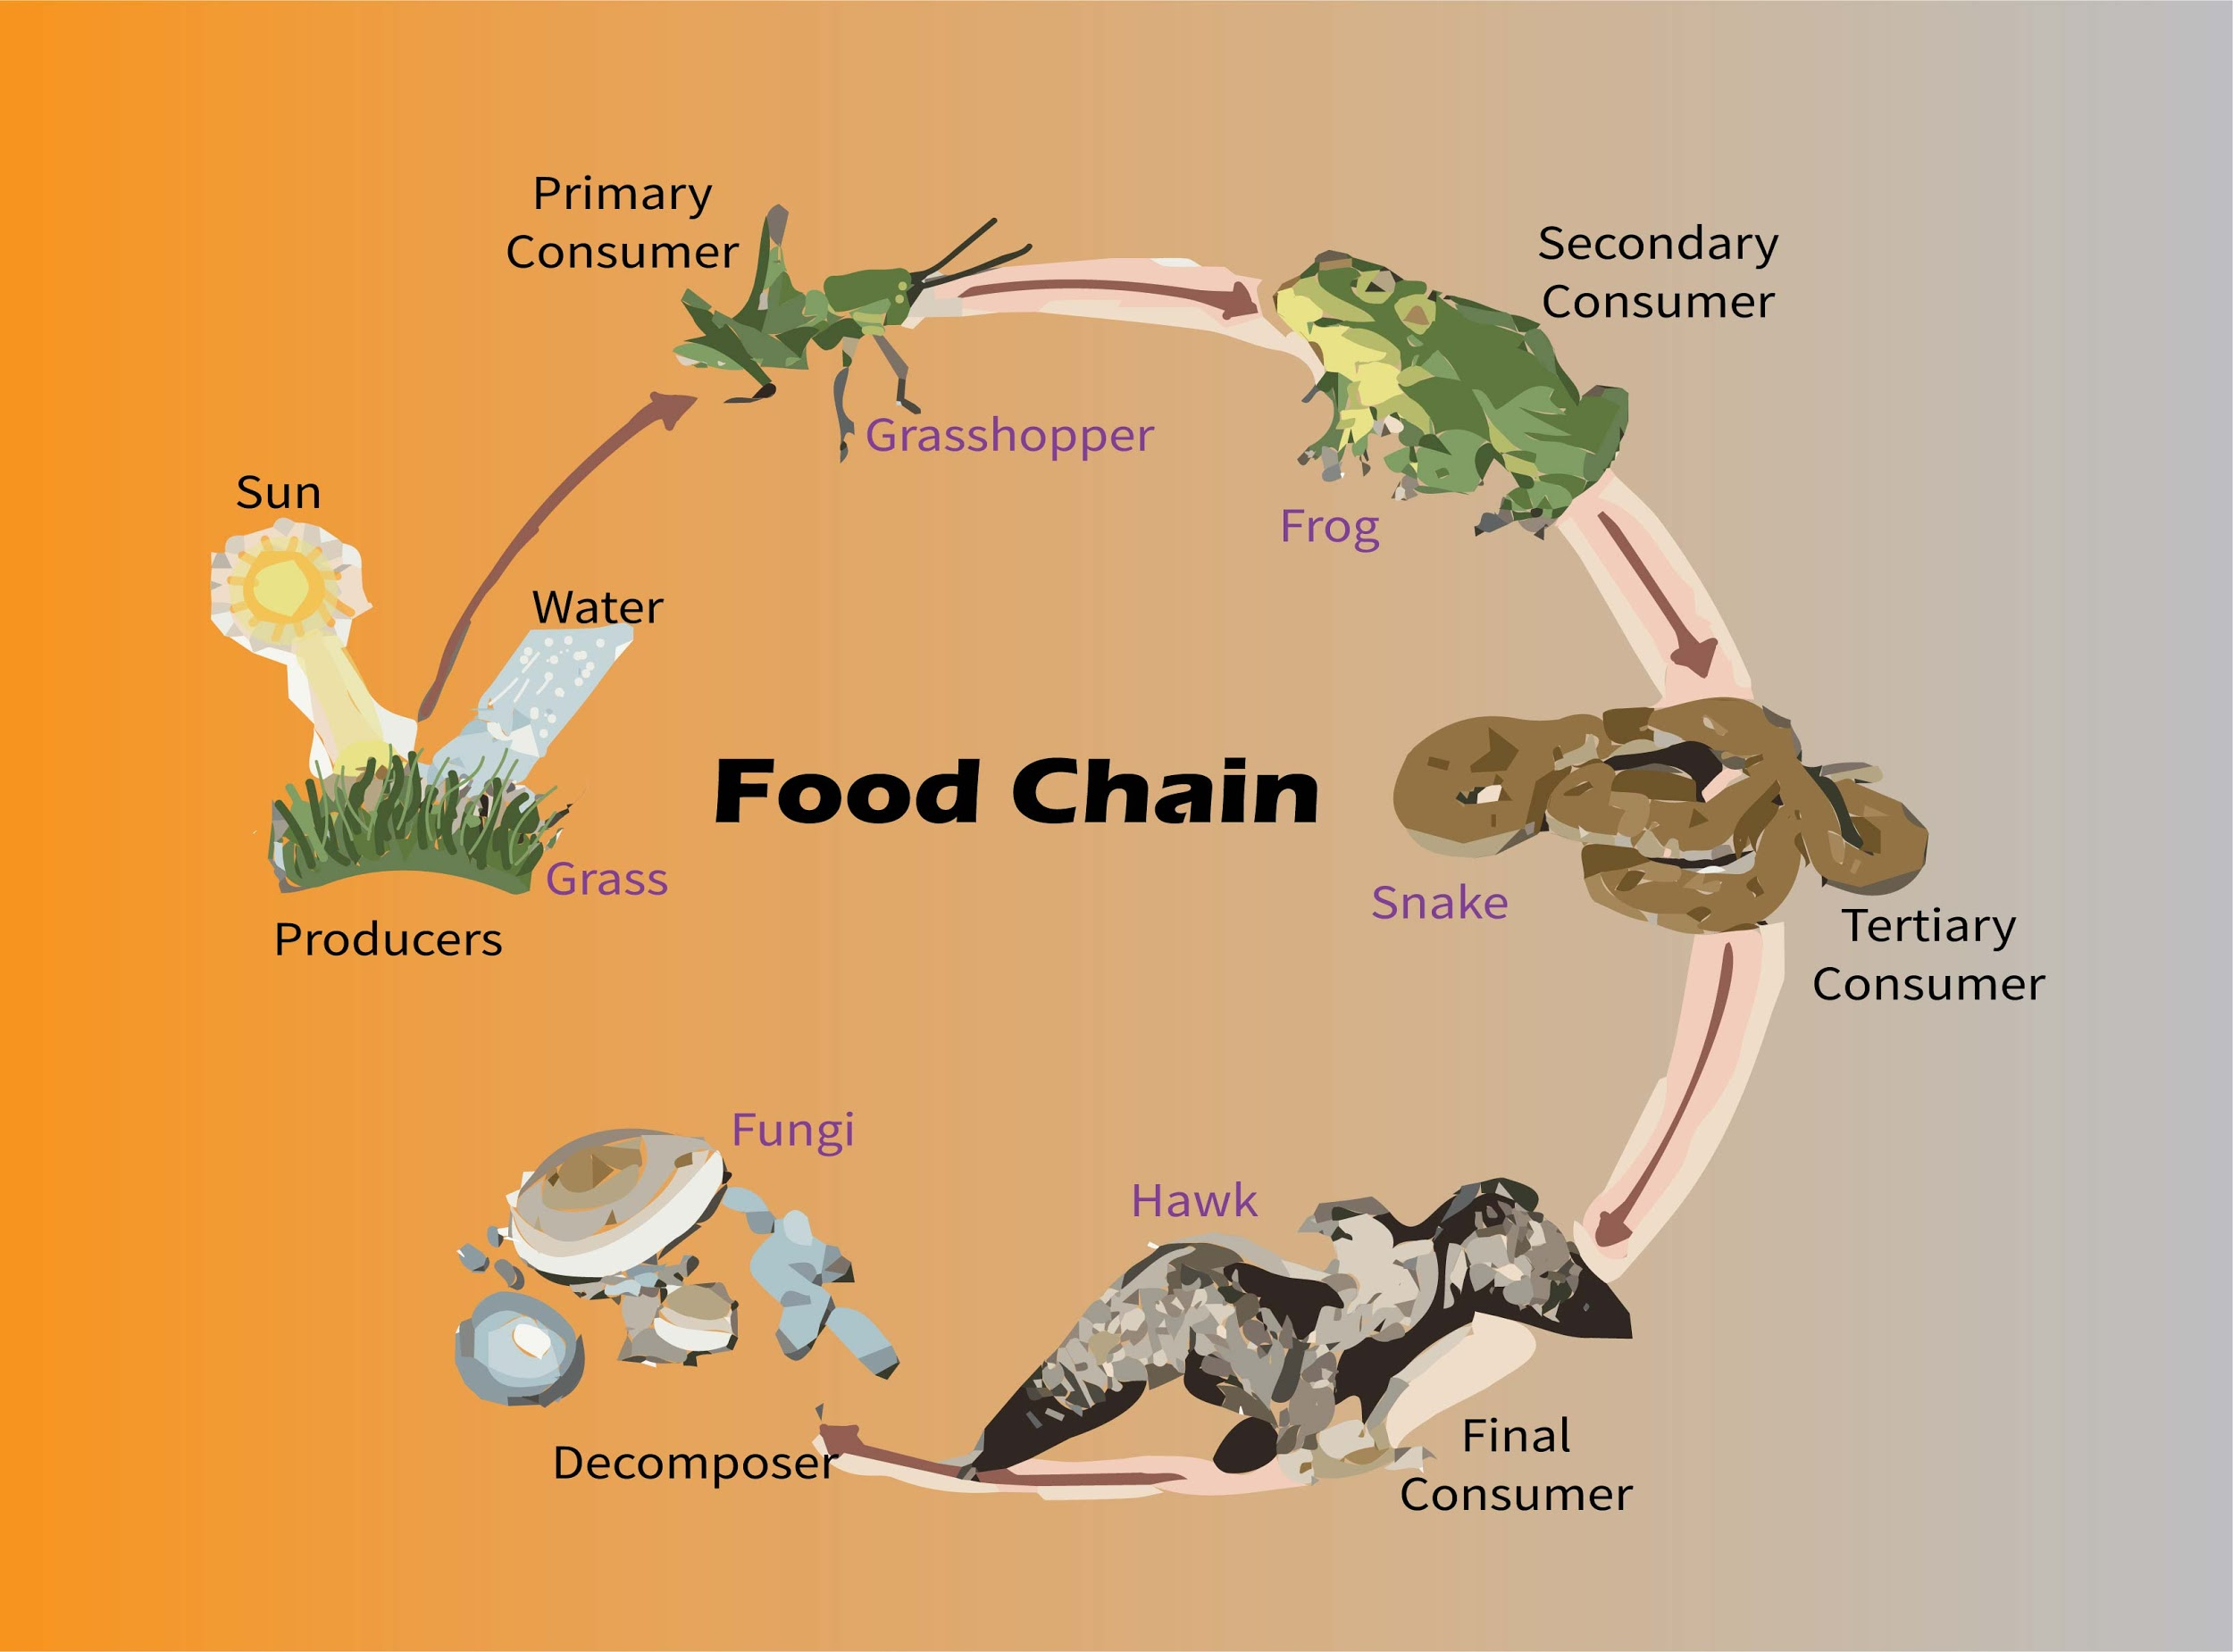 what the relationship between producers and consumers in a food chain